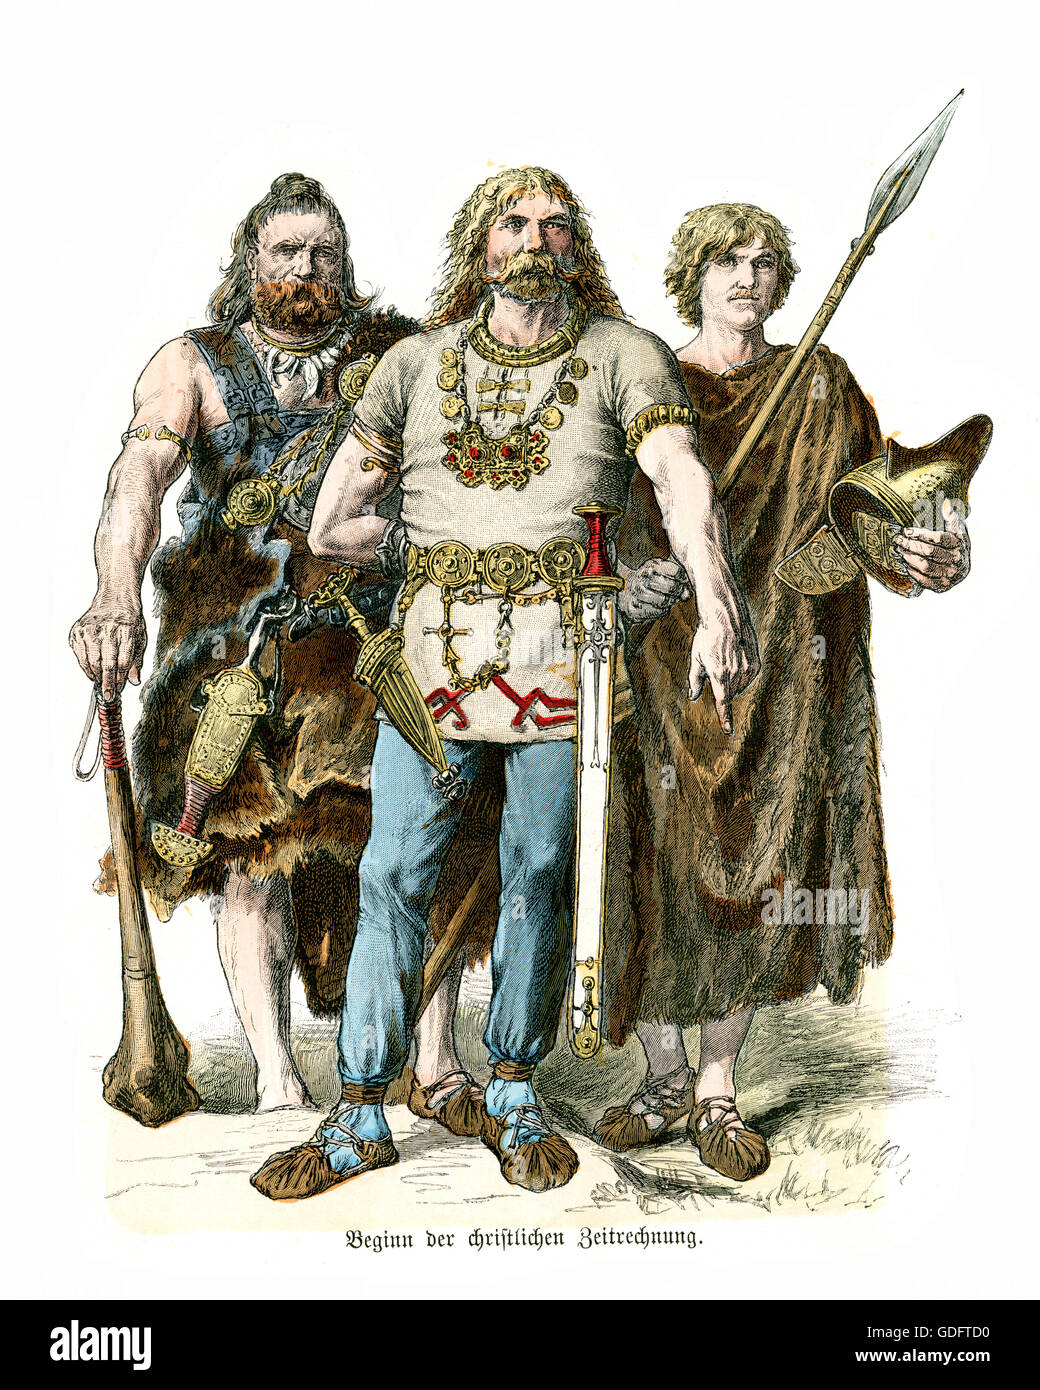 Fashions of germanic tribesmen at the start of the Christian era. Stock Photo